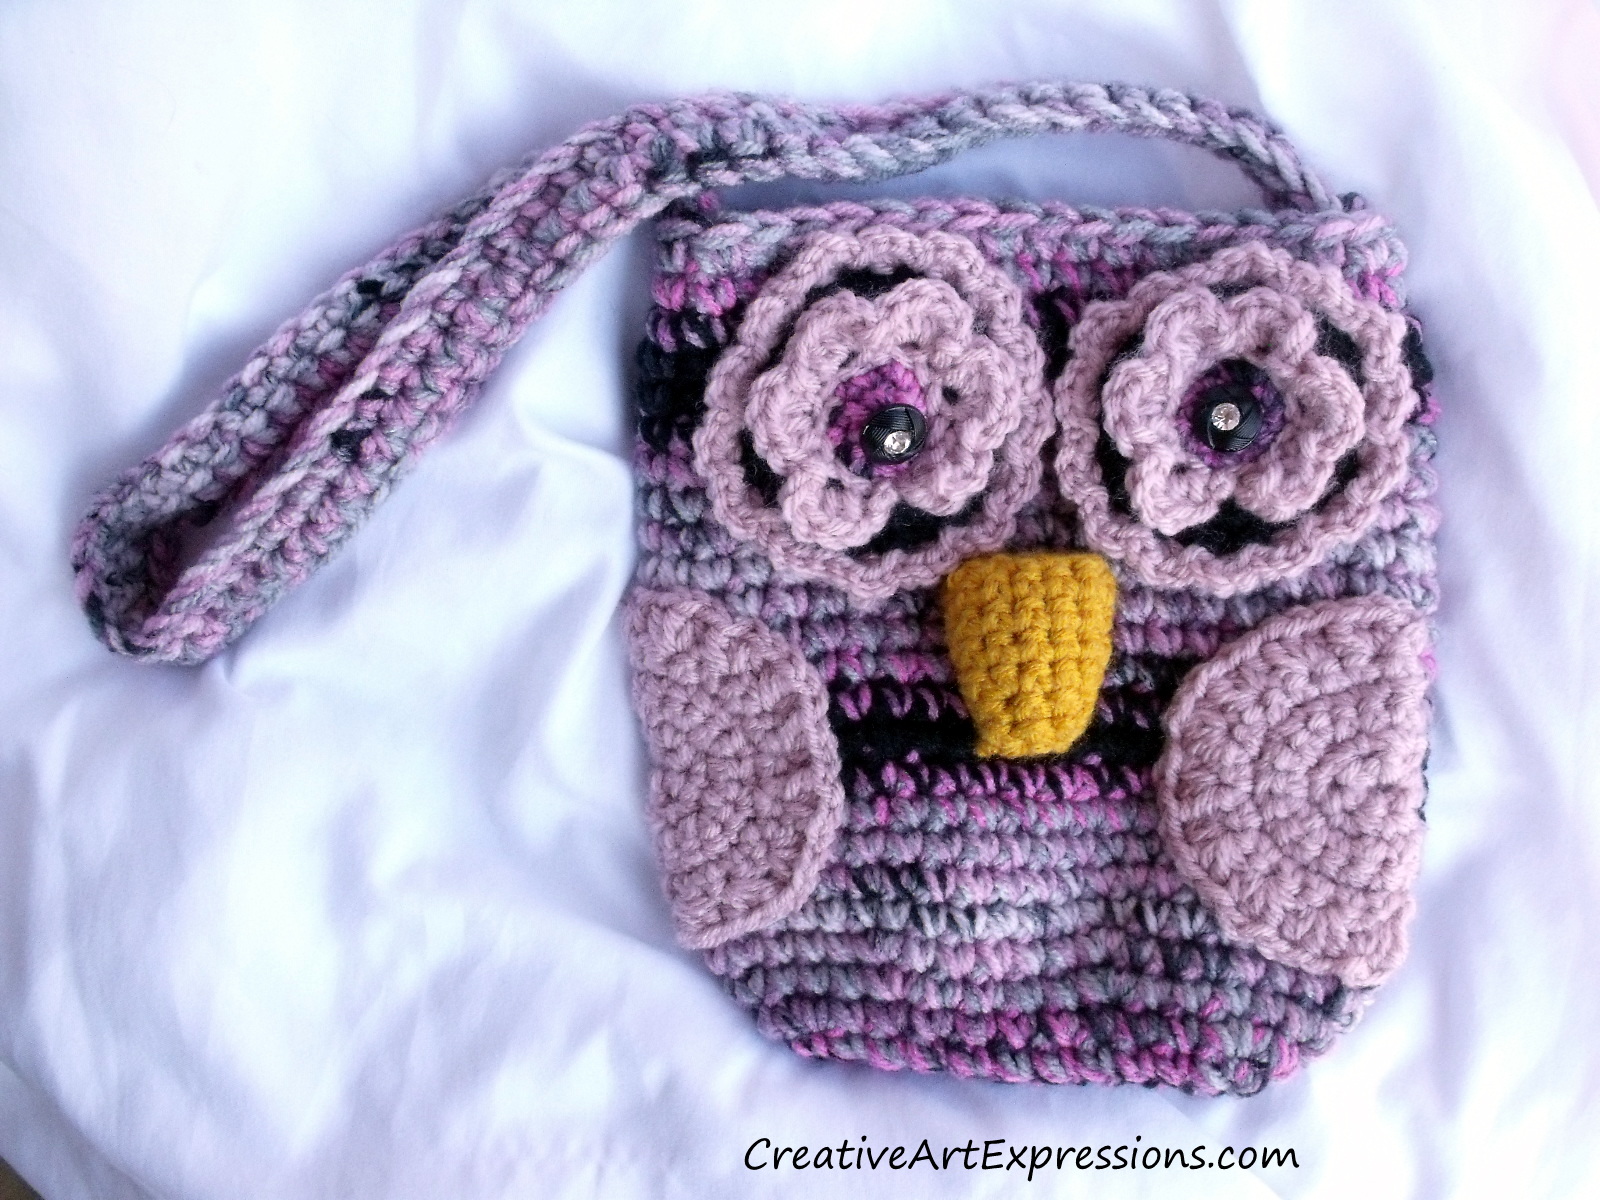 Creative Art Expressions Hand Crocheted Pink & Black Owl Purse